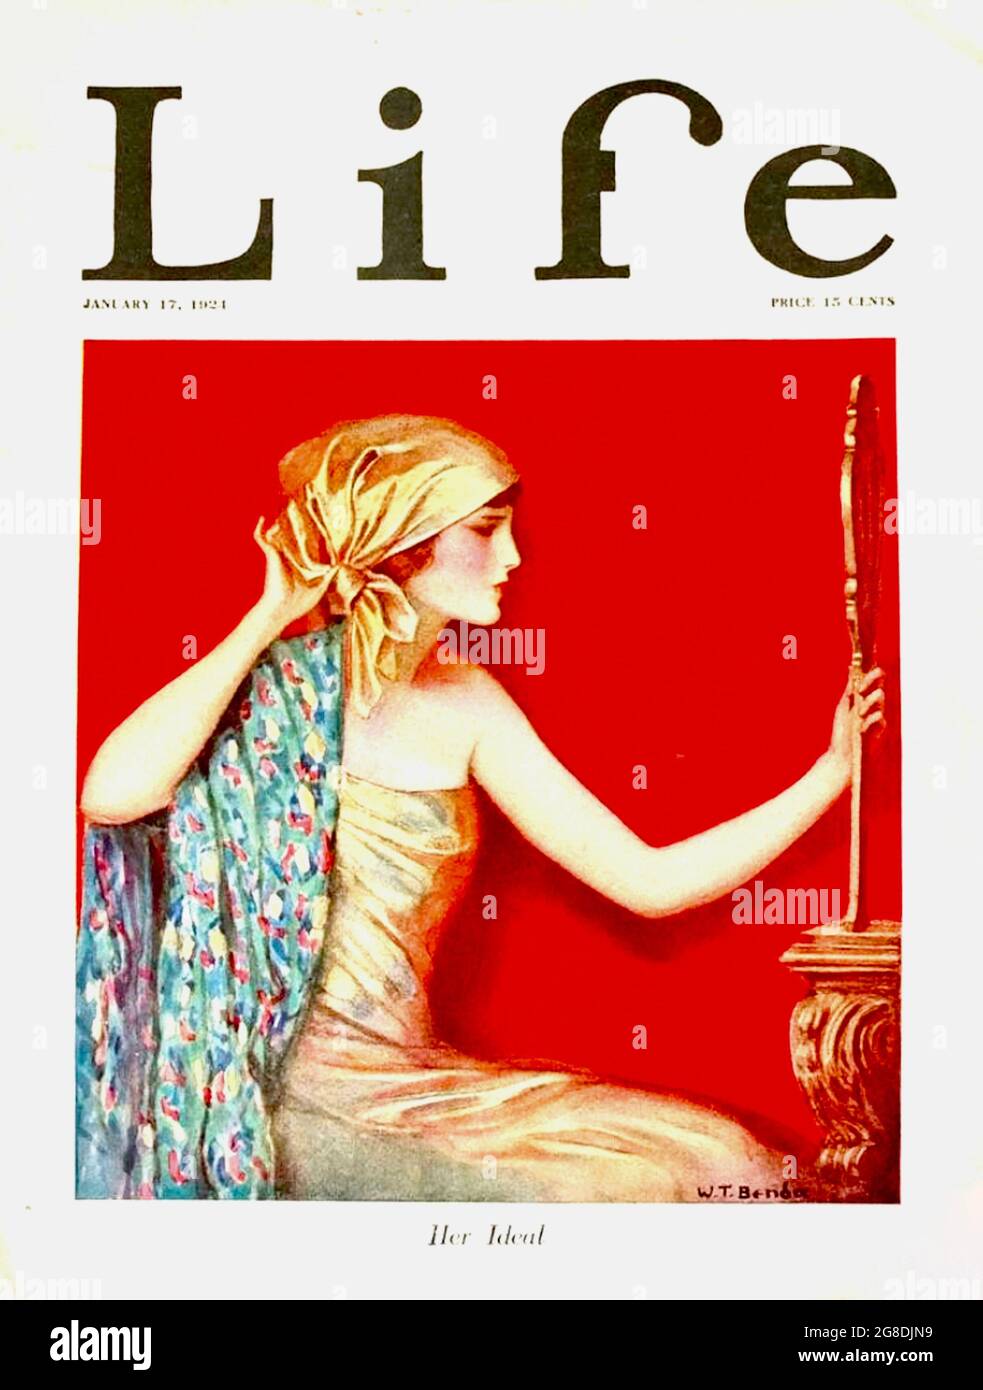 Władysław Teodor Benda Life Magazine cover design from 1924 entitled 'Her Idol' - Vainly a woman regards herself in the mirror. Stock Photo